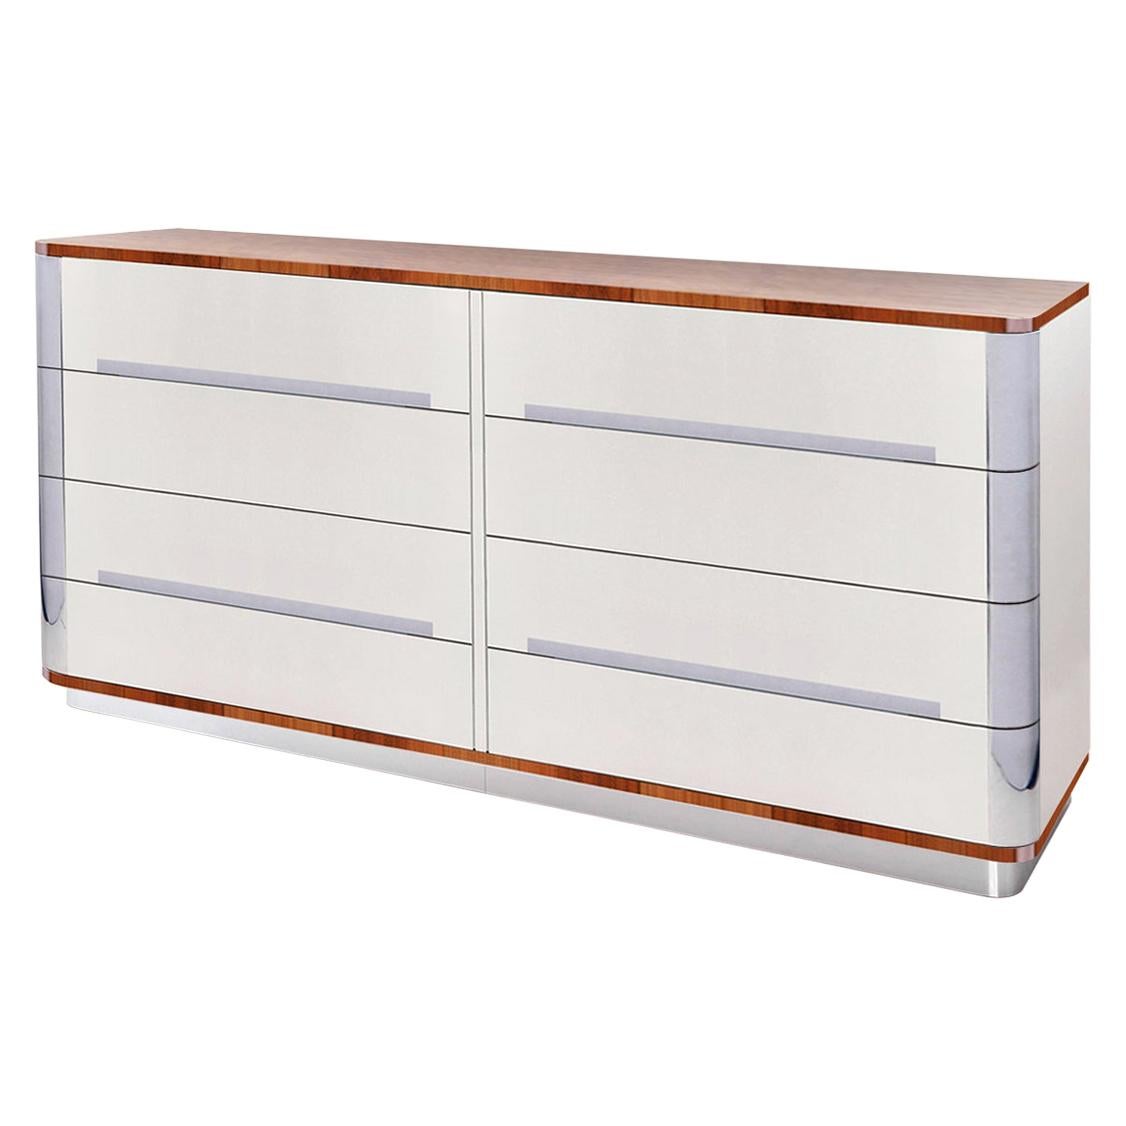 Modern Contemporary Customised Dresser with 8 Drawers, High-Gloss Lacquered Wood